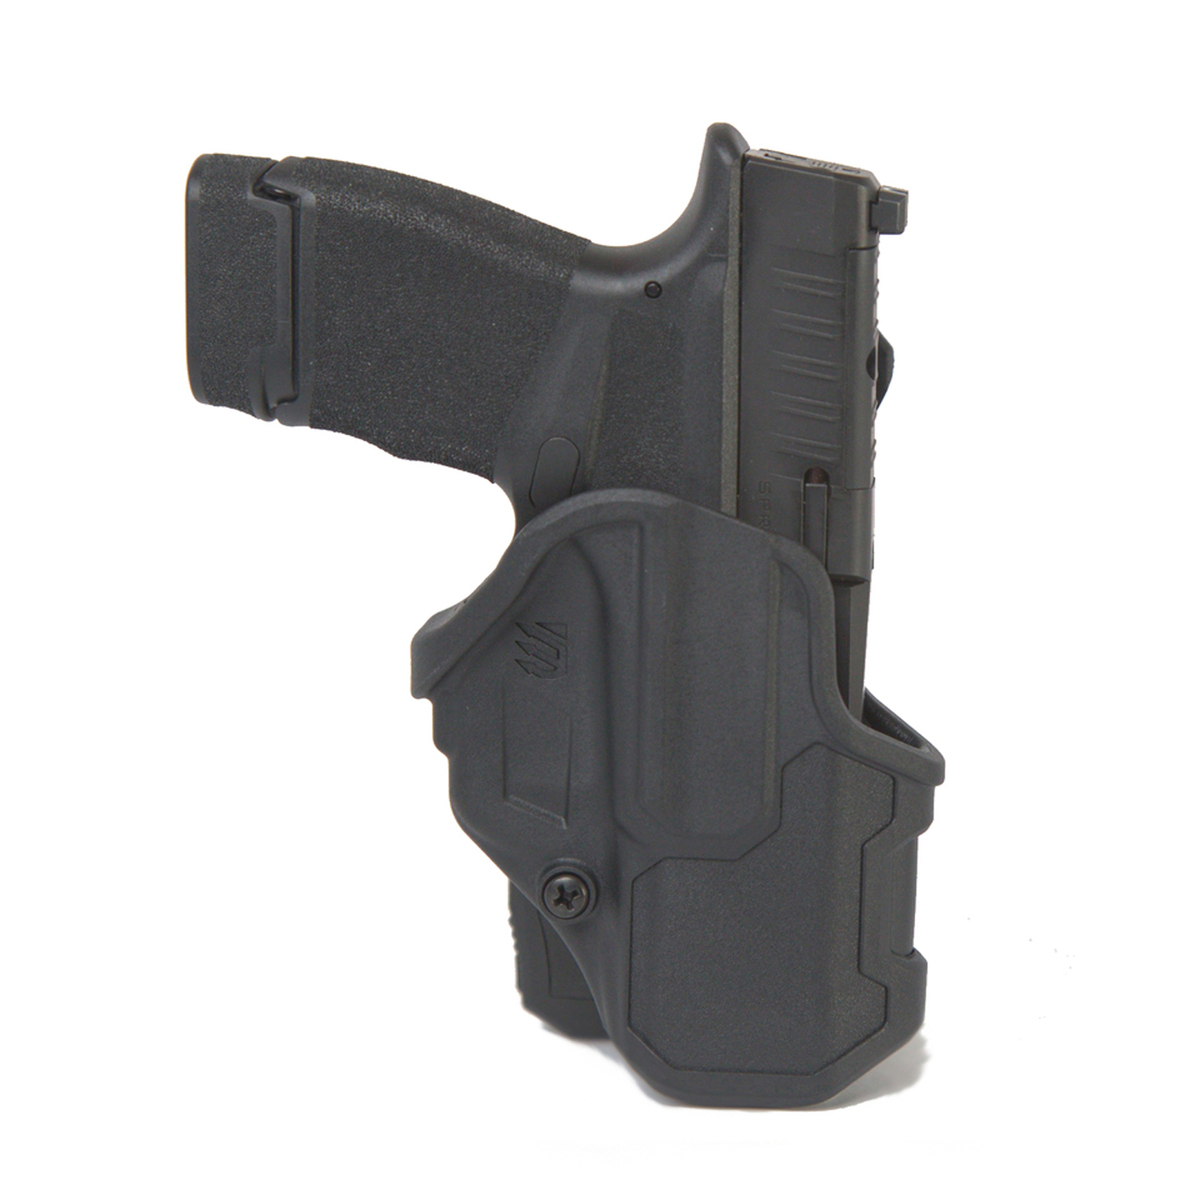 Blackhawk T-Series Level 3 Duty Non-Light Bearing Holsters for Sig P320 TLR  1/2 Right Hand - Botach®